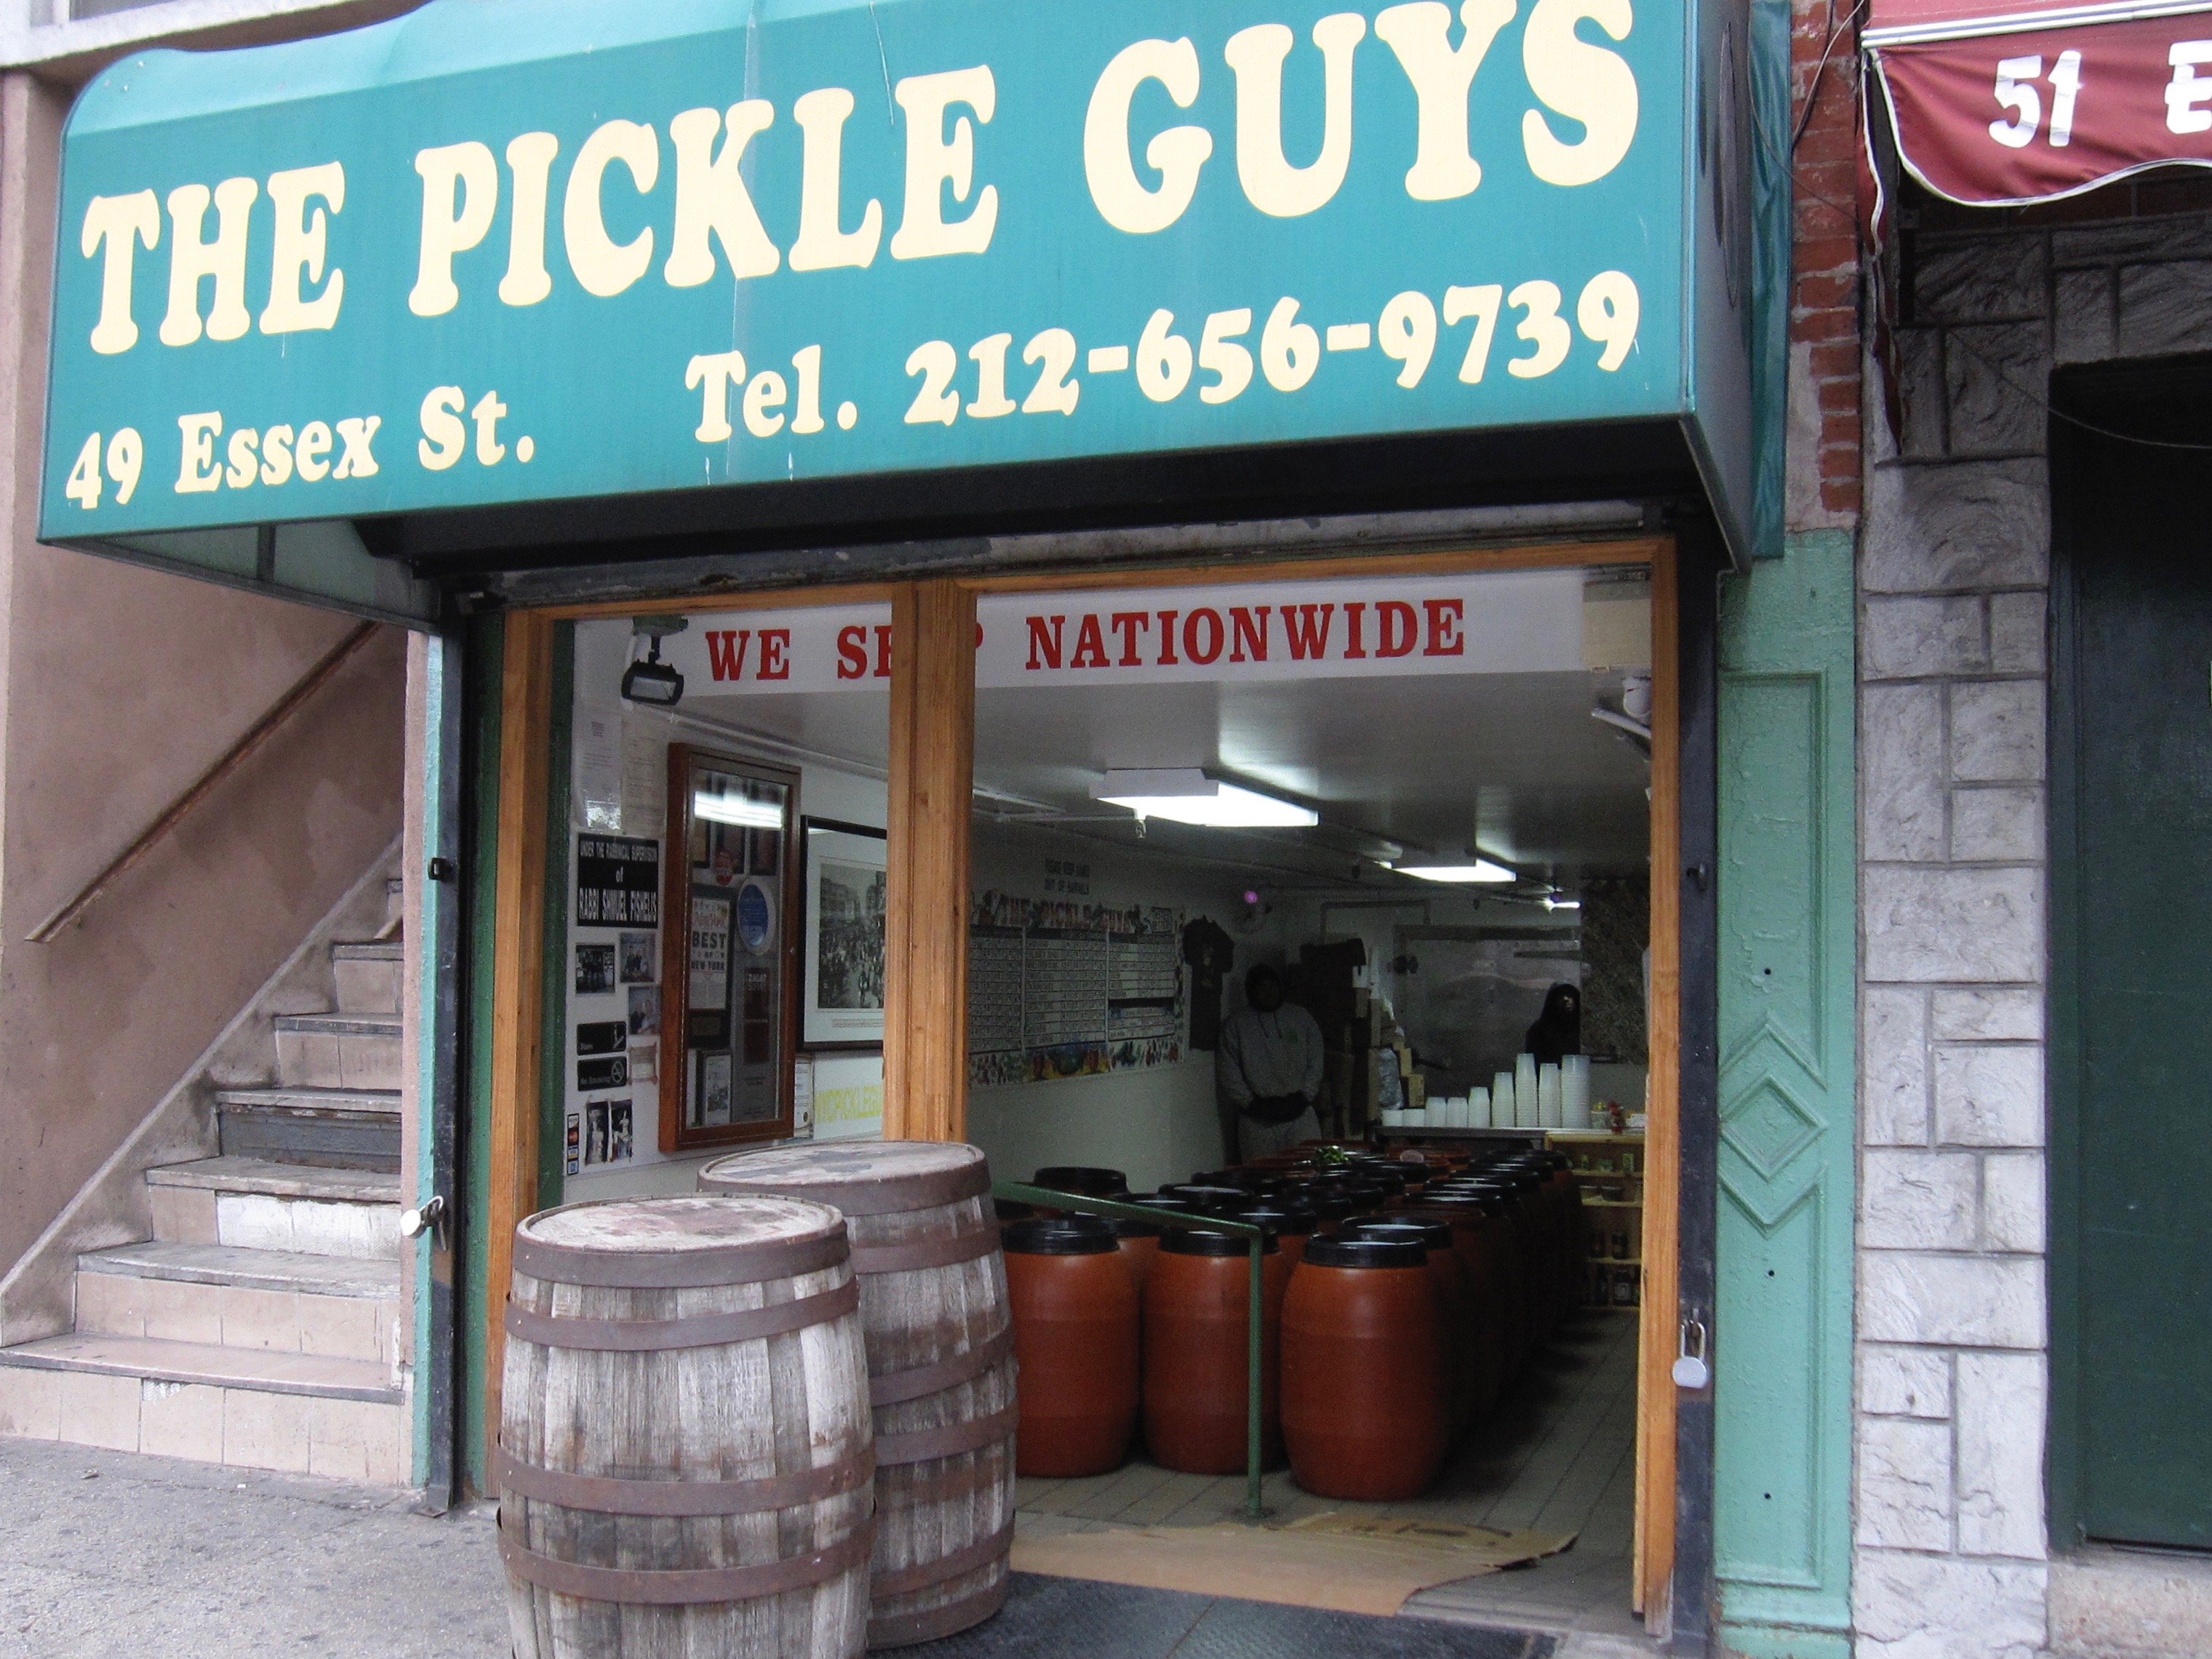 The Pickle Guys, 49 Essex St, Lower East Side, NYC- Would be fun